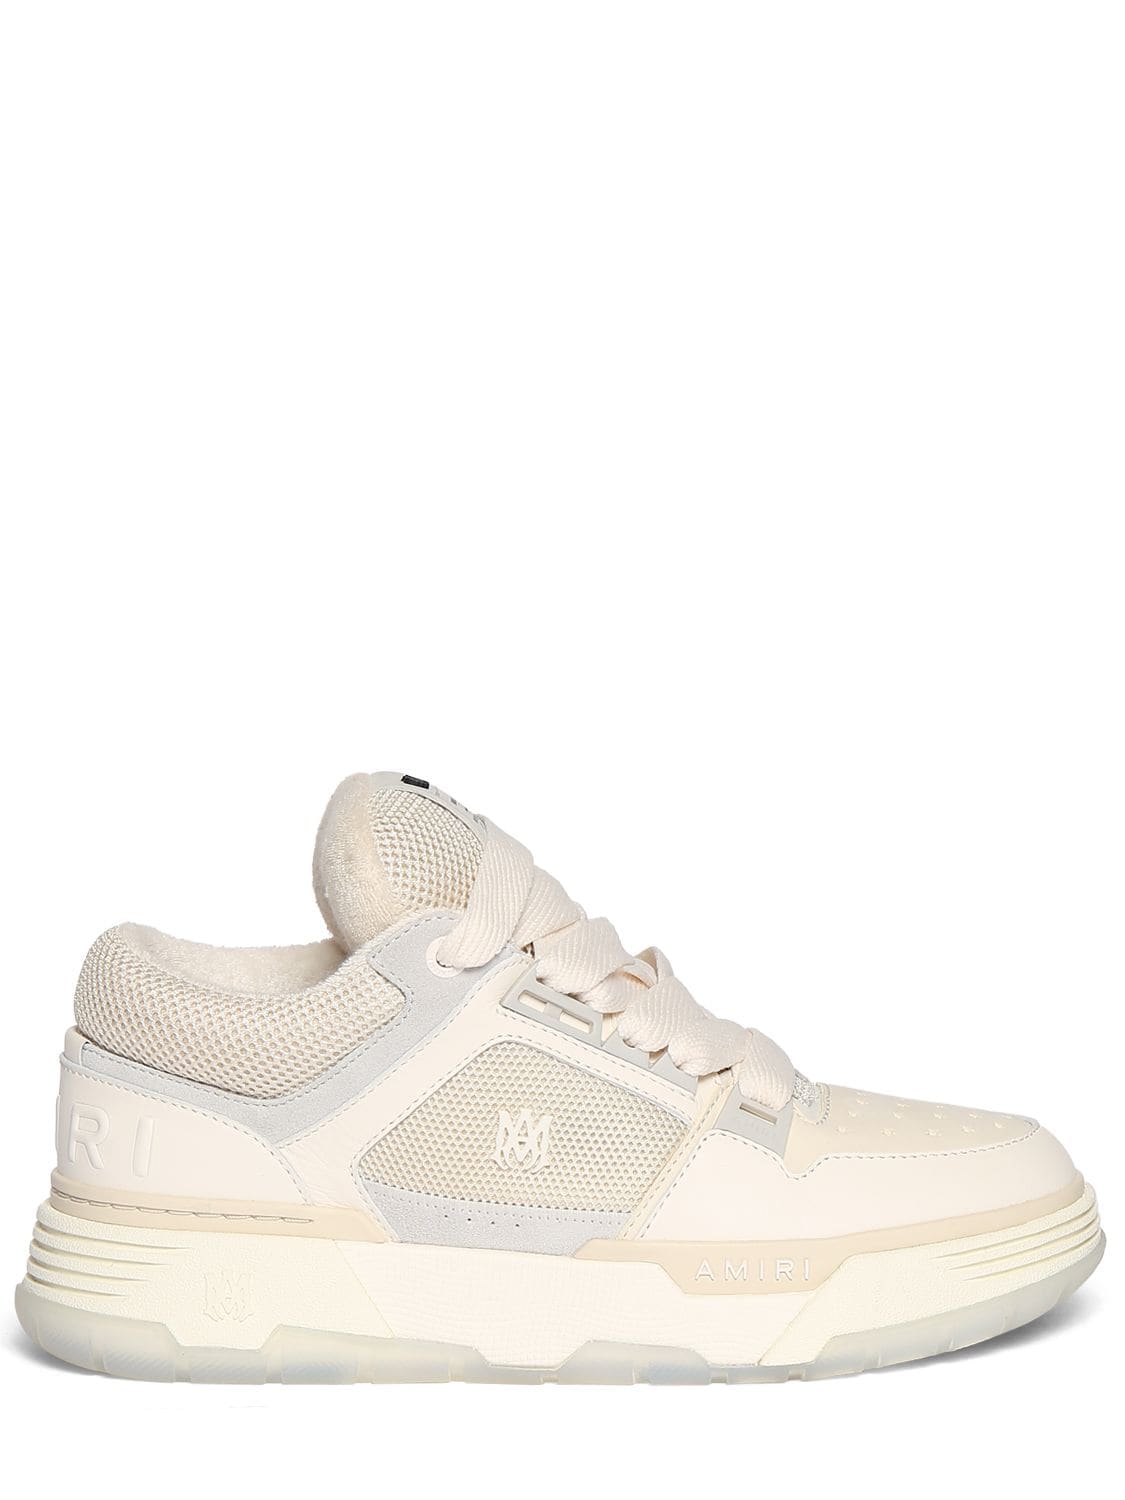 Ma-1 Low Top Sneakers